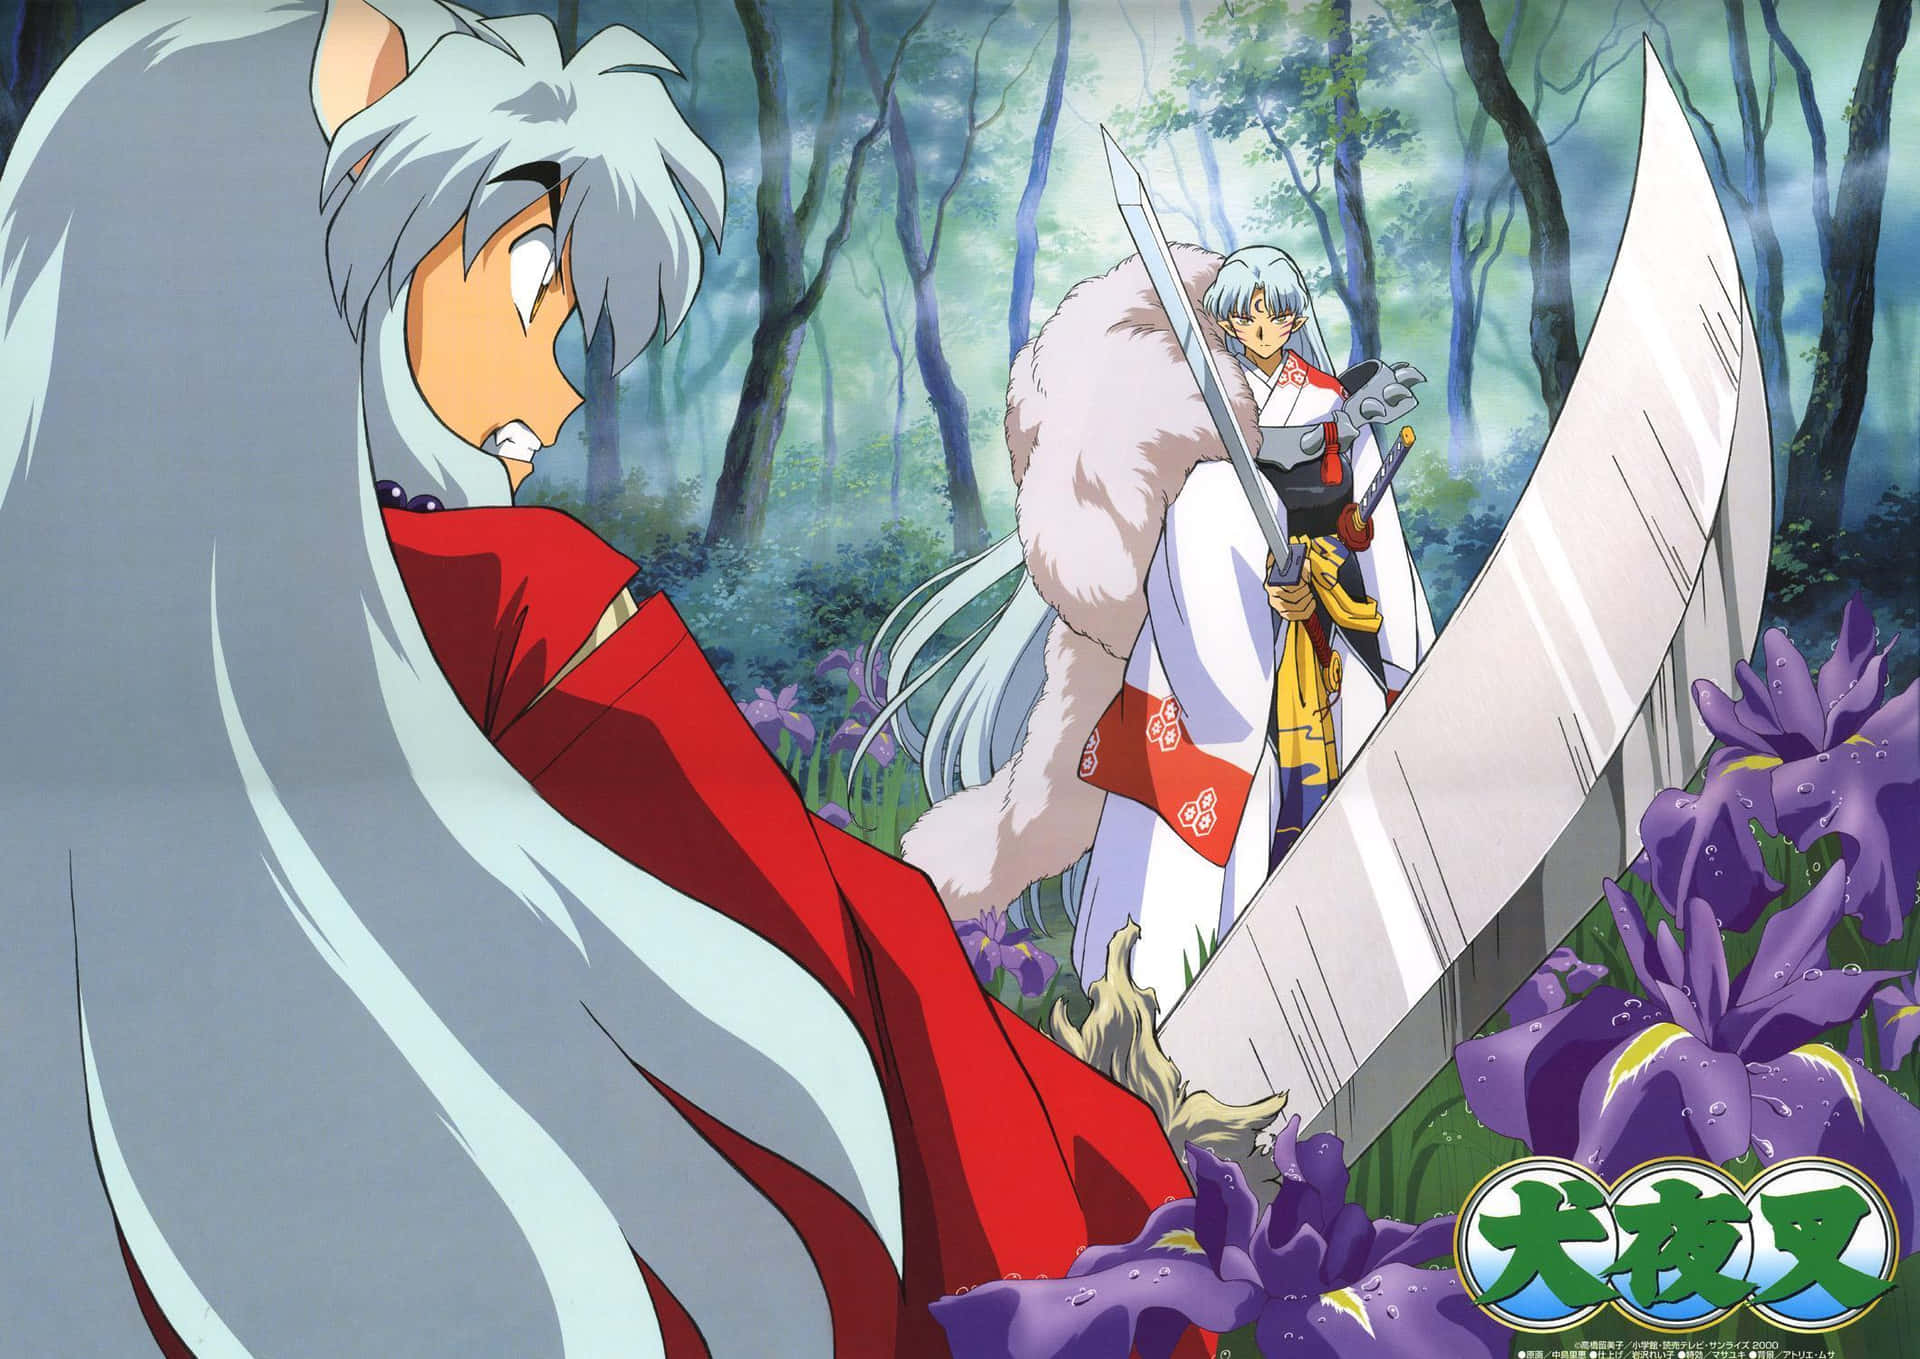 Feel the mystic power of Inuyasha